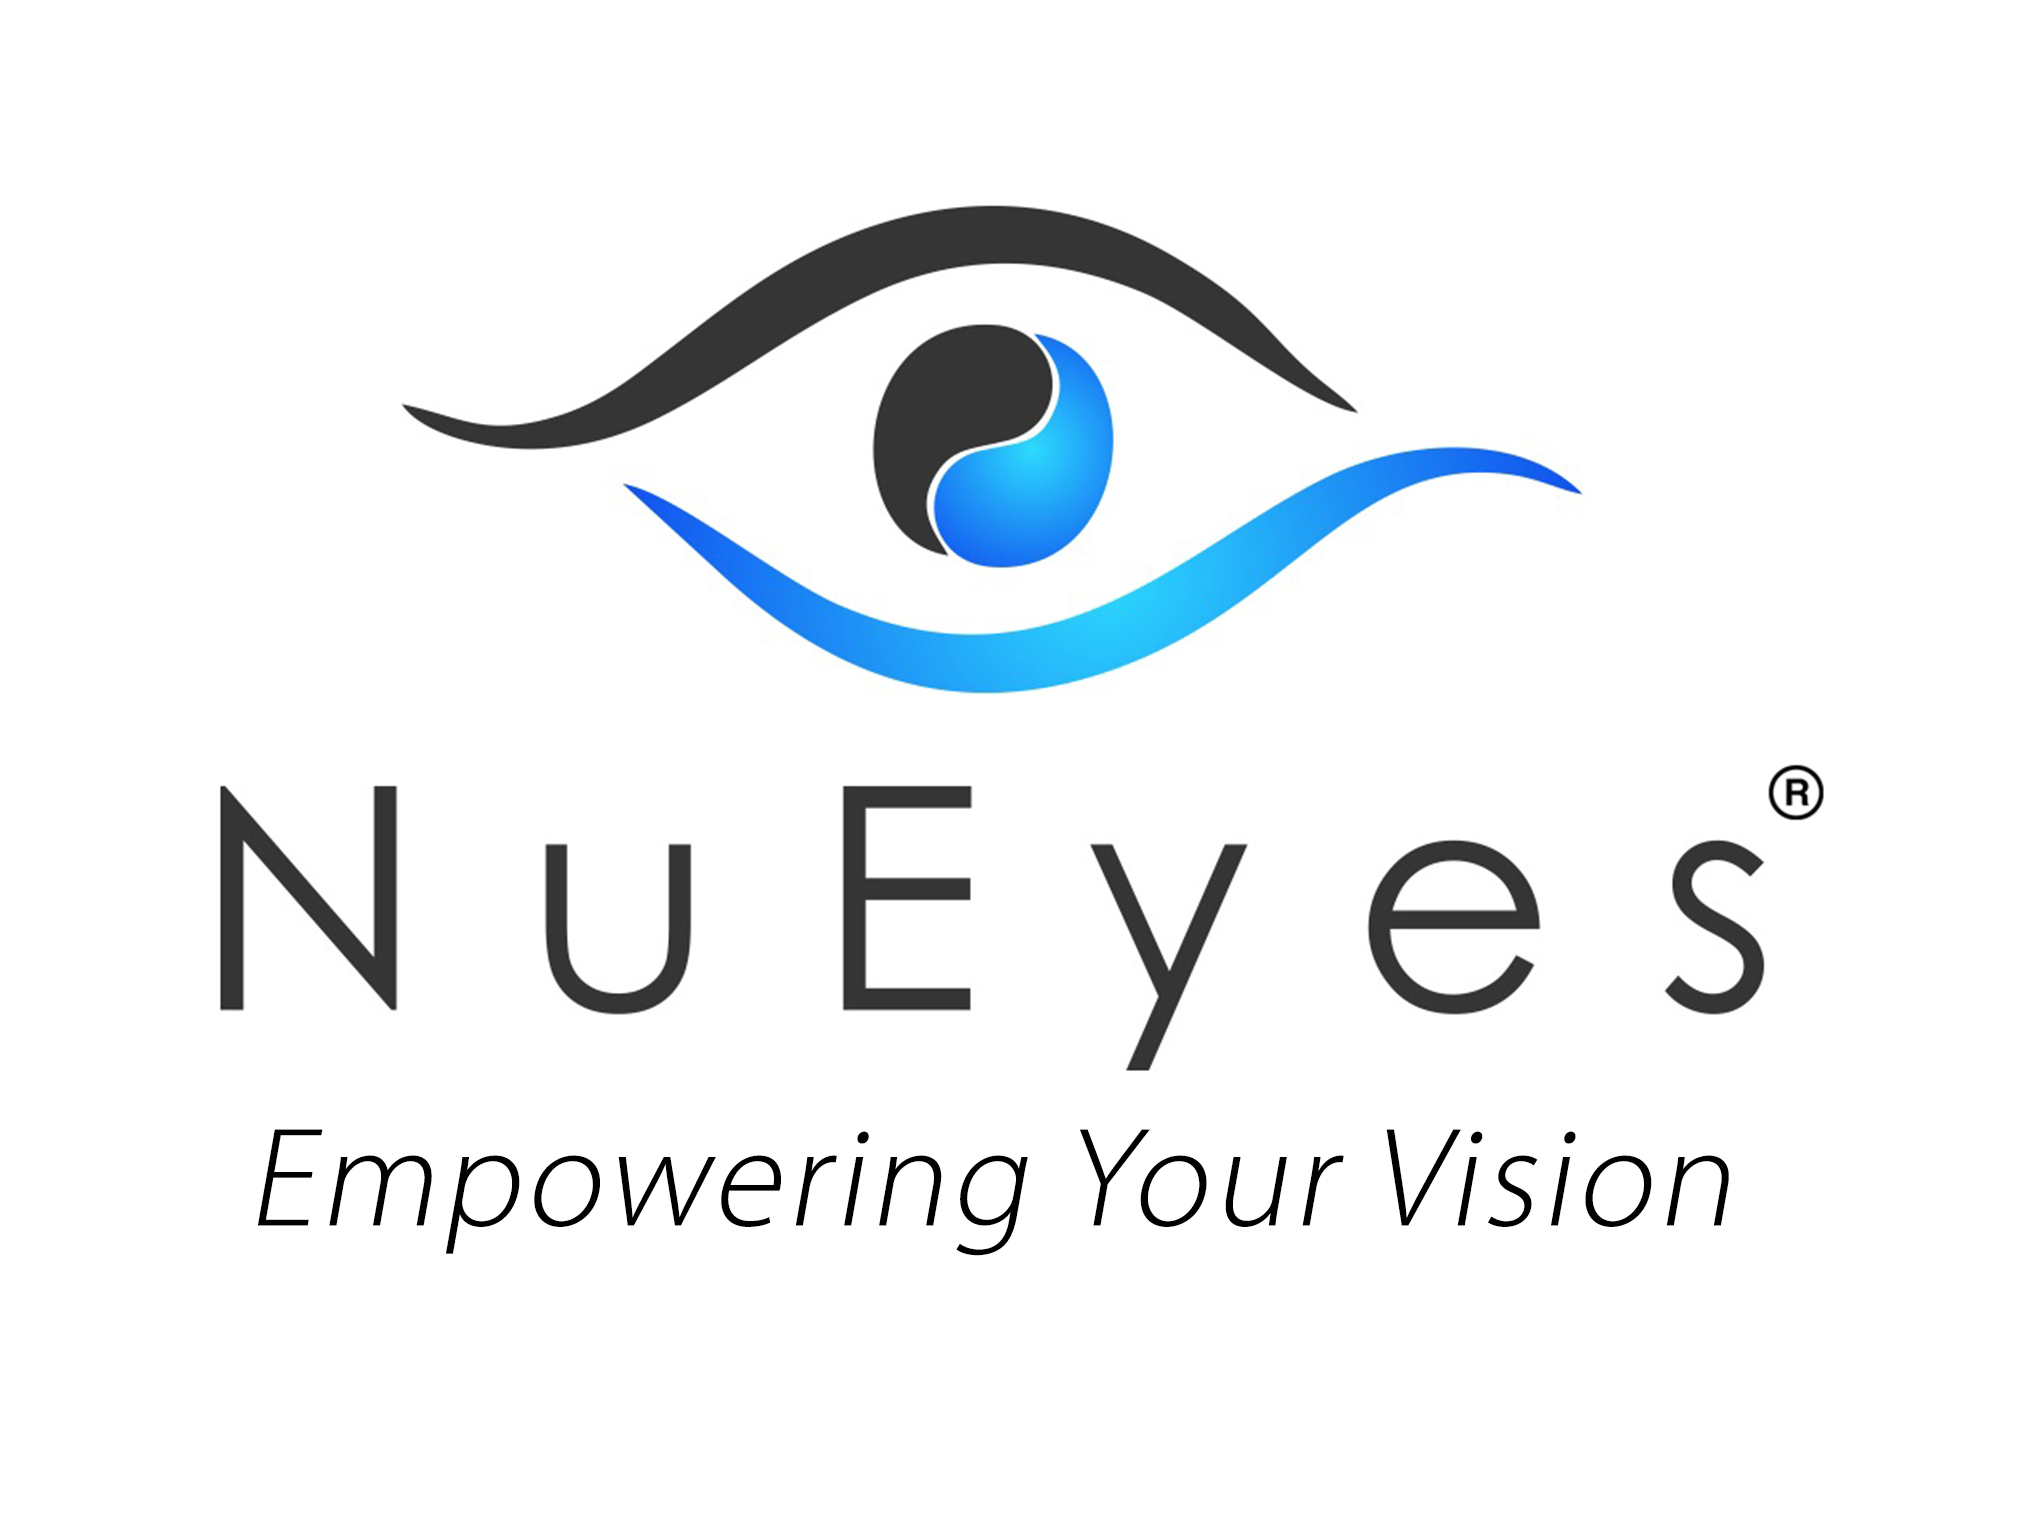 NuEyes Technologies Inc., Wednesday, October 2, 2019, Press release picture